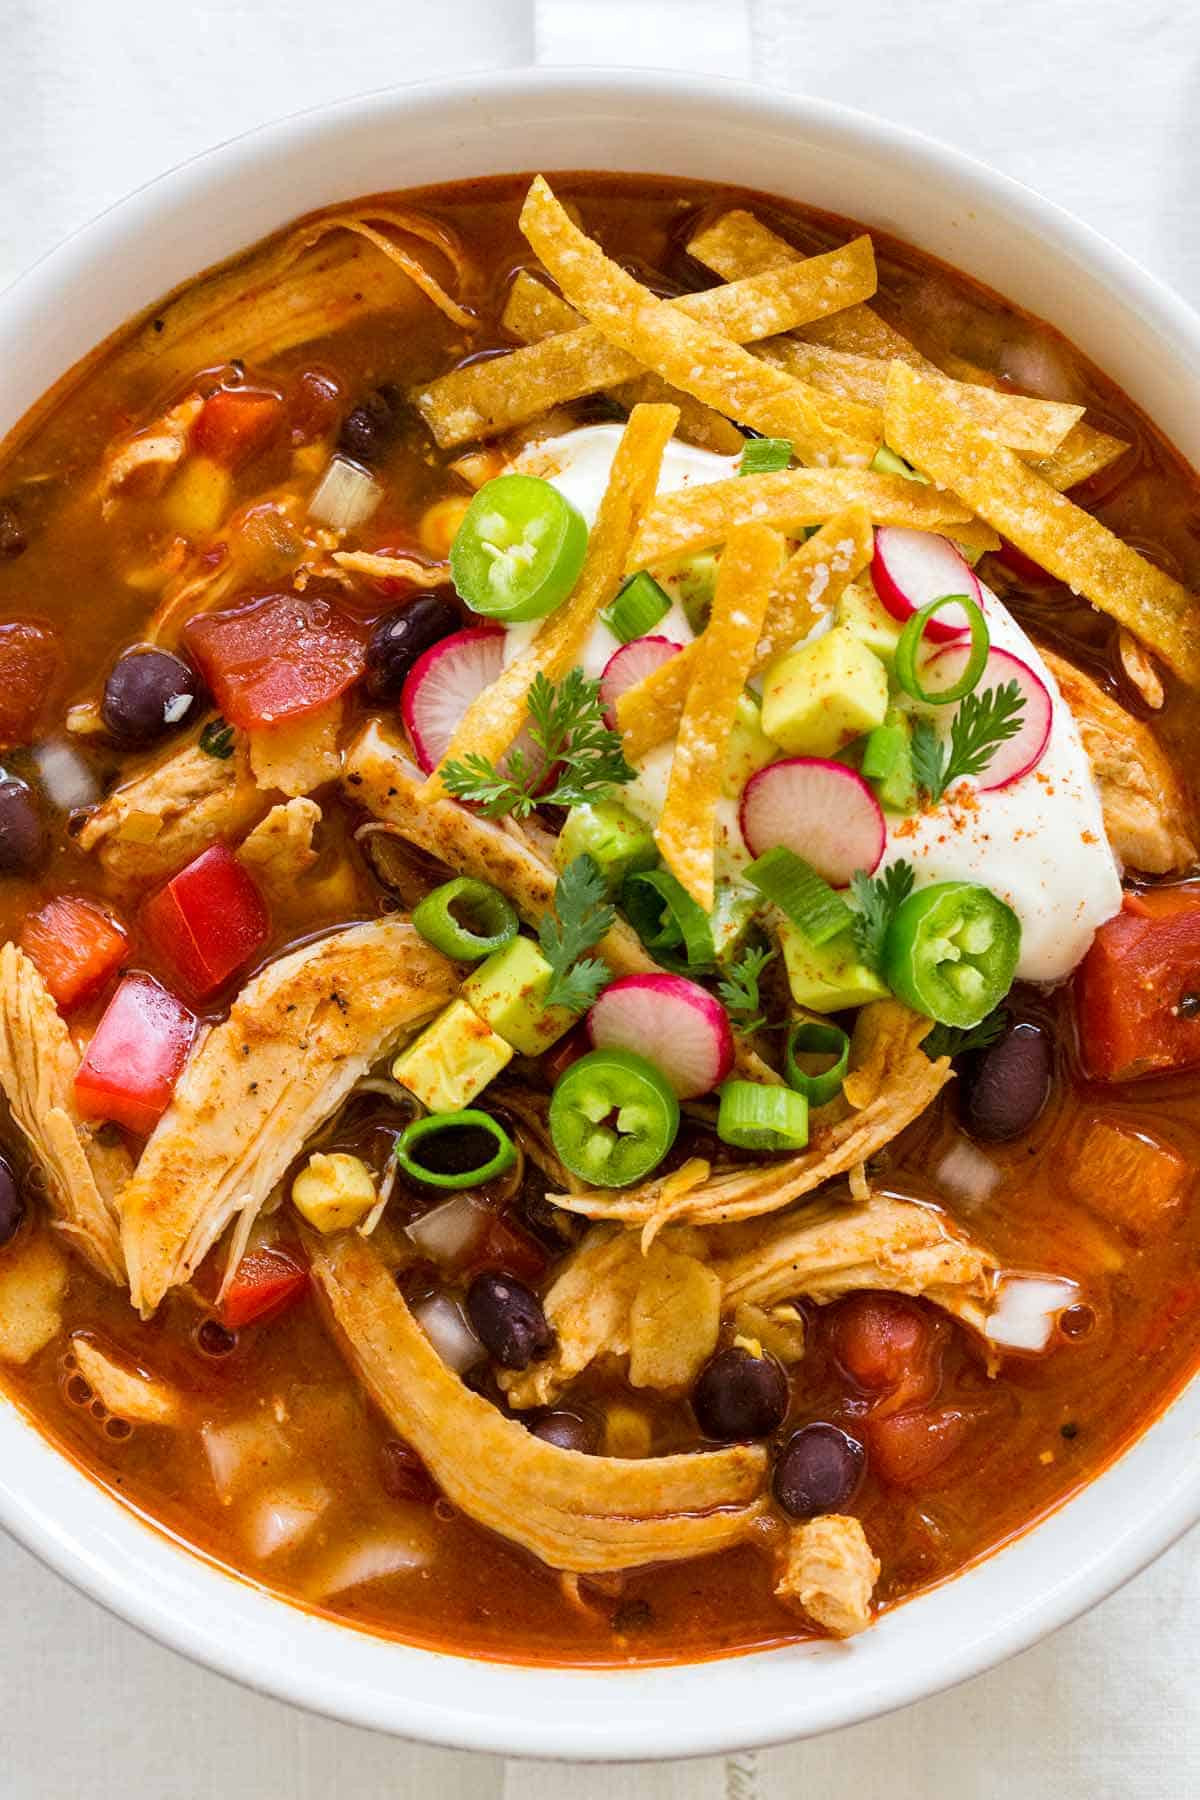 The 20 Best Ideas for Chili's Chicken tortilla soup - Best Recipes ...